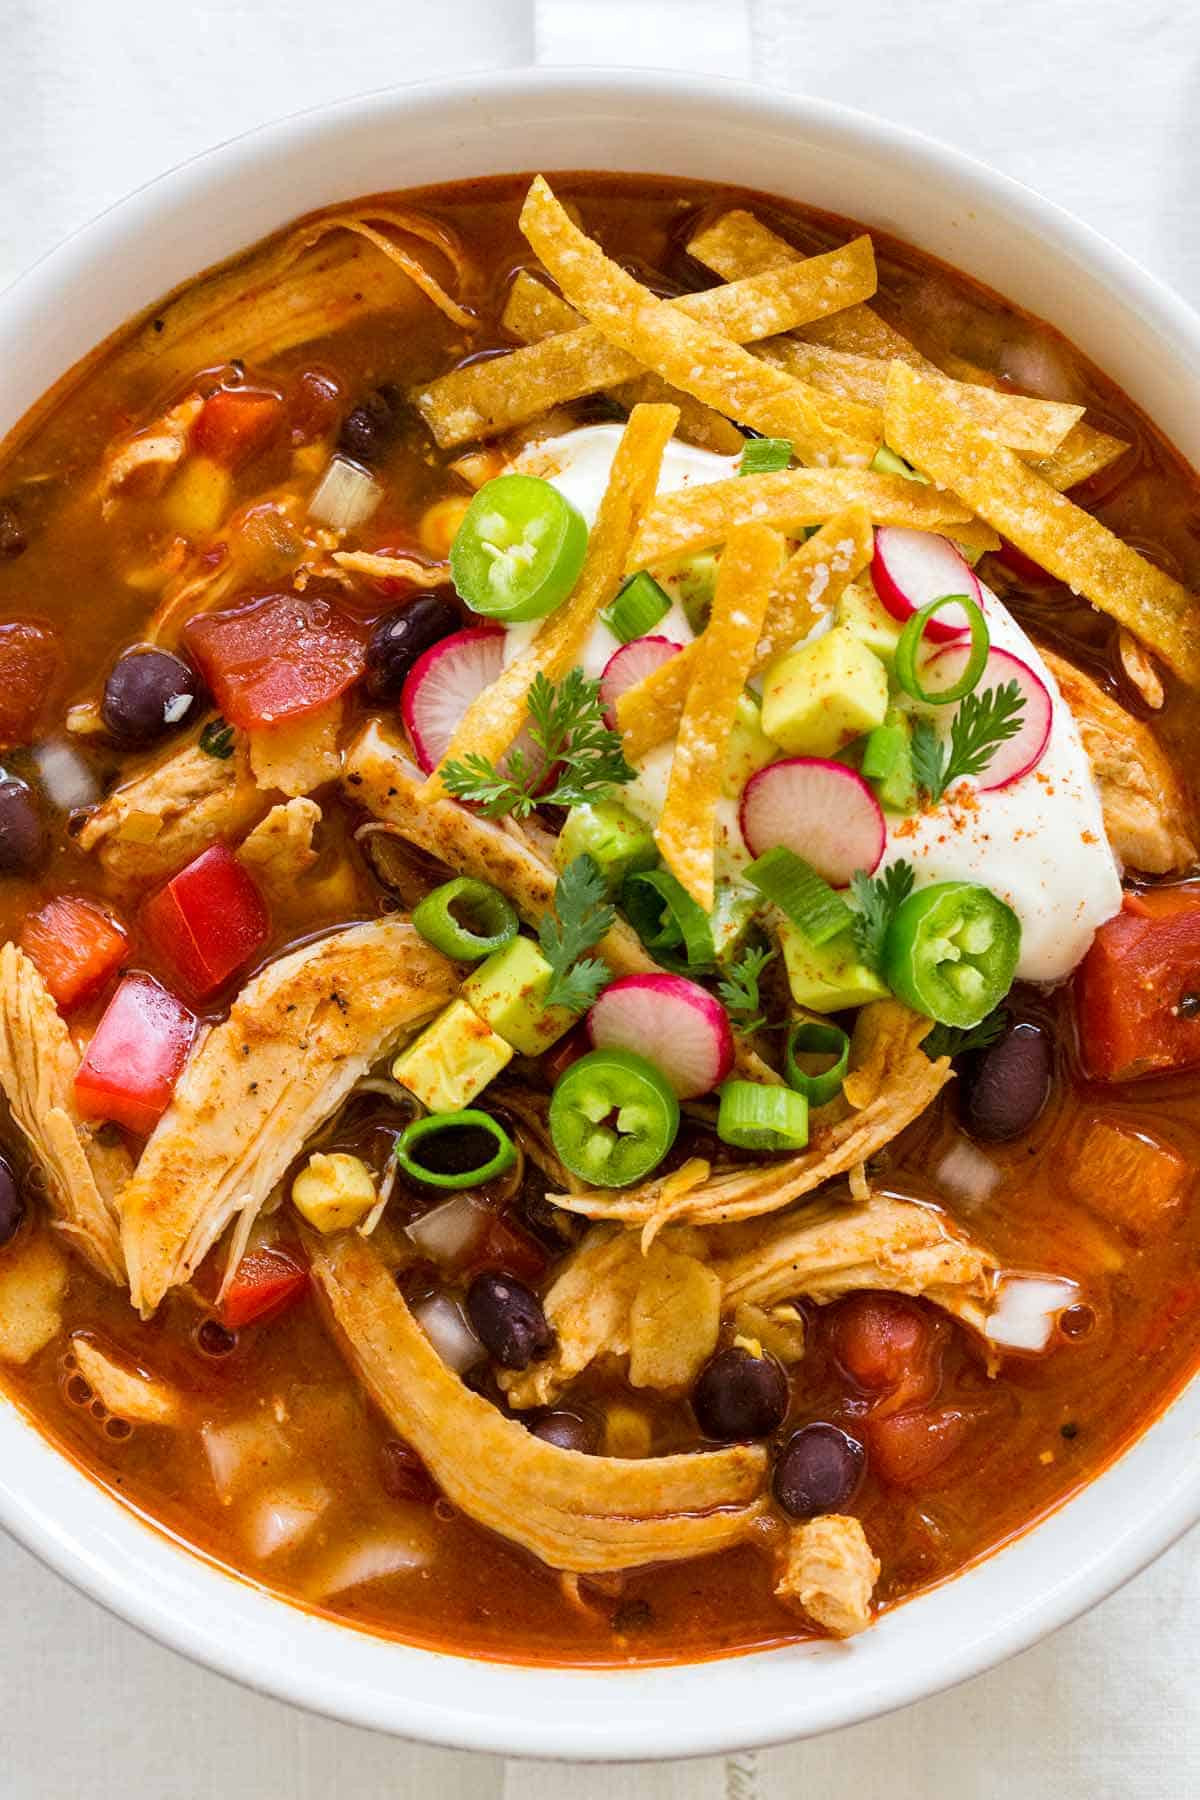 The 20 Best Ideas for Chili's Chicken tortilla soup - Best Recipes ...